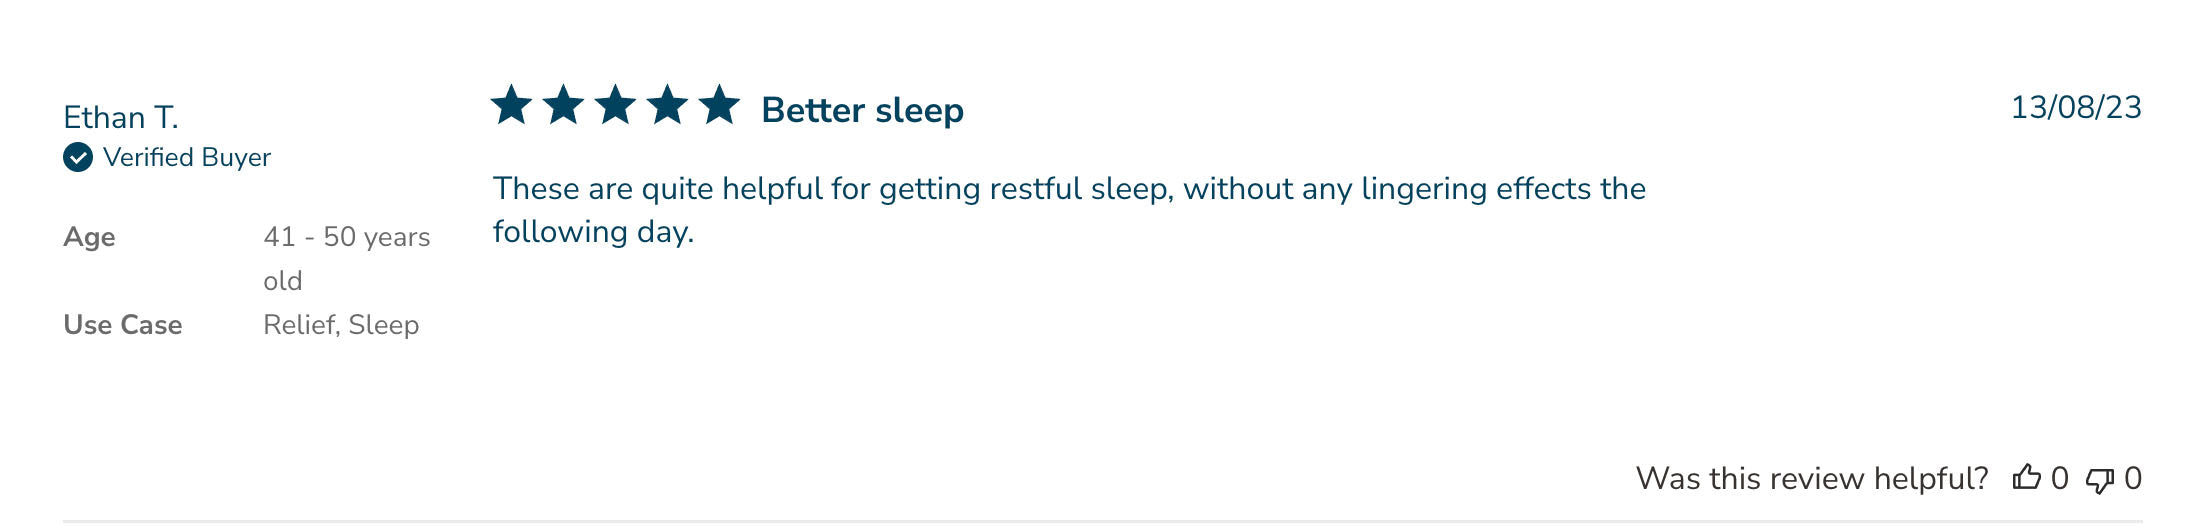 5 stars review by Ethan T.: Better sleep. These are quite helpful for getting restful sleep, without any lingering effects the following day.